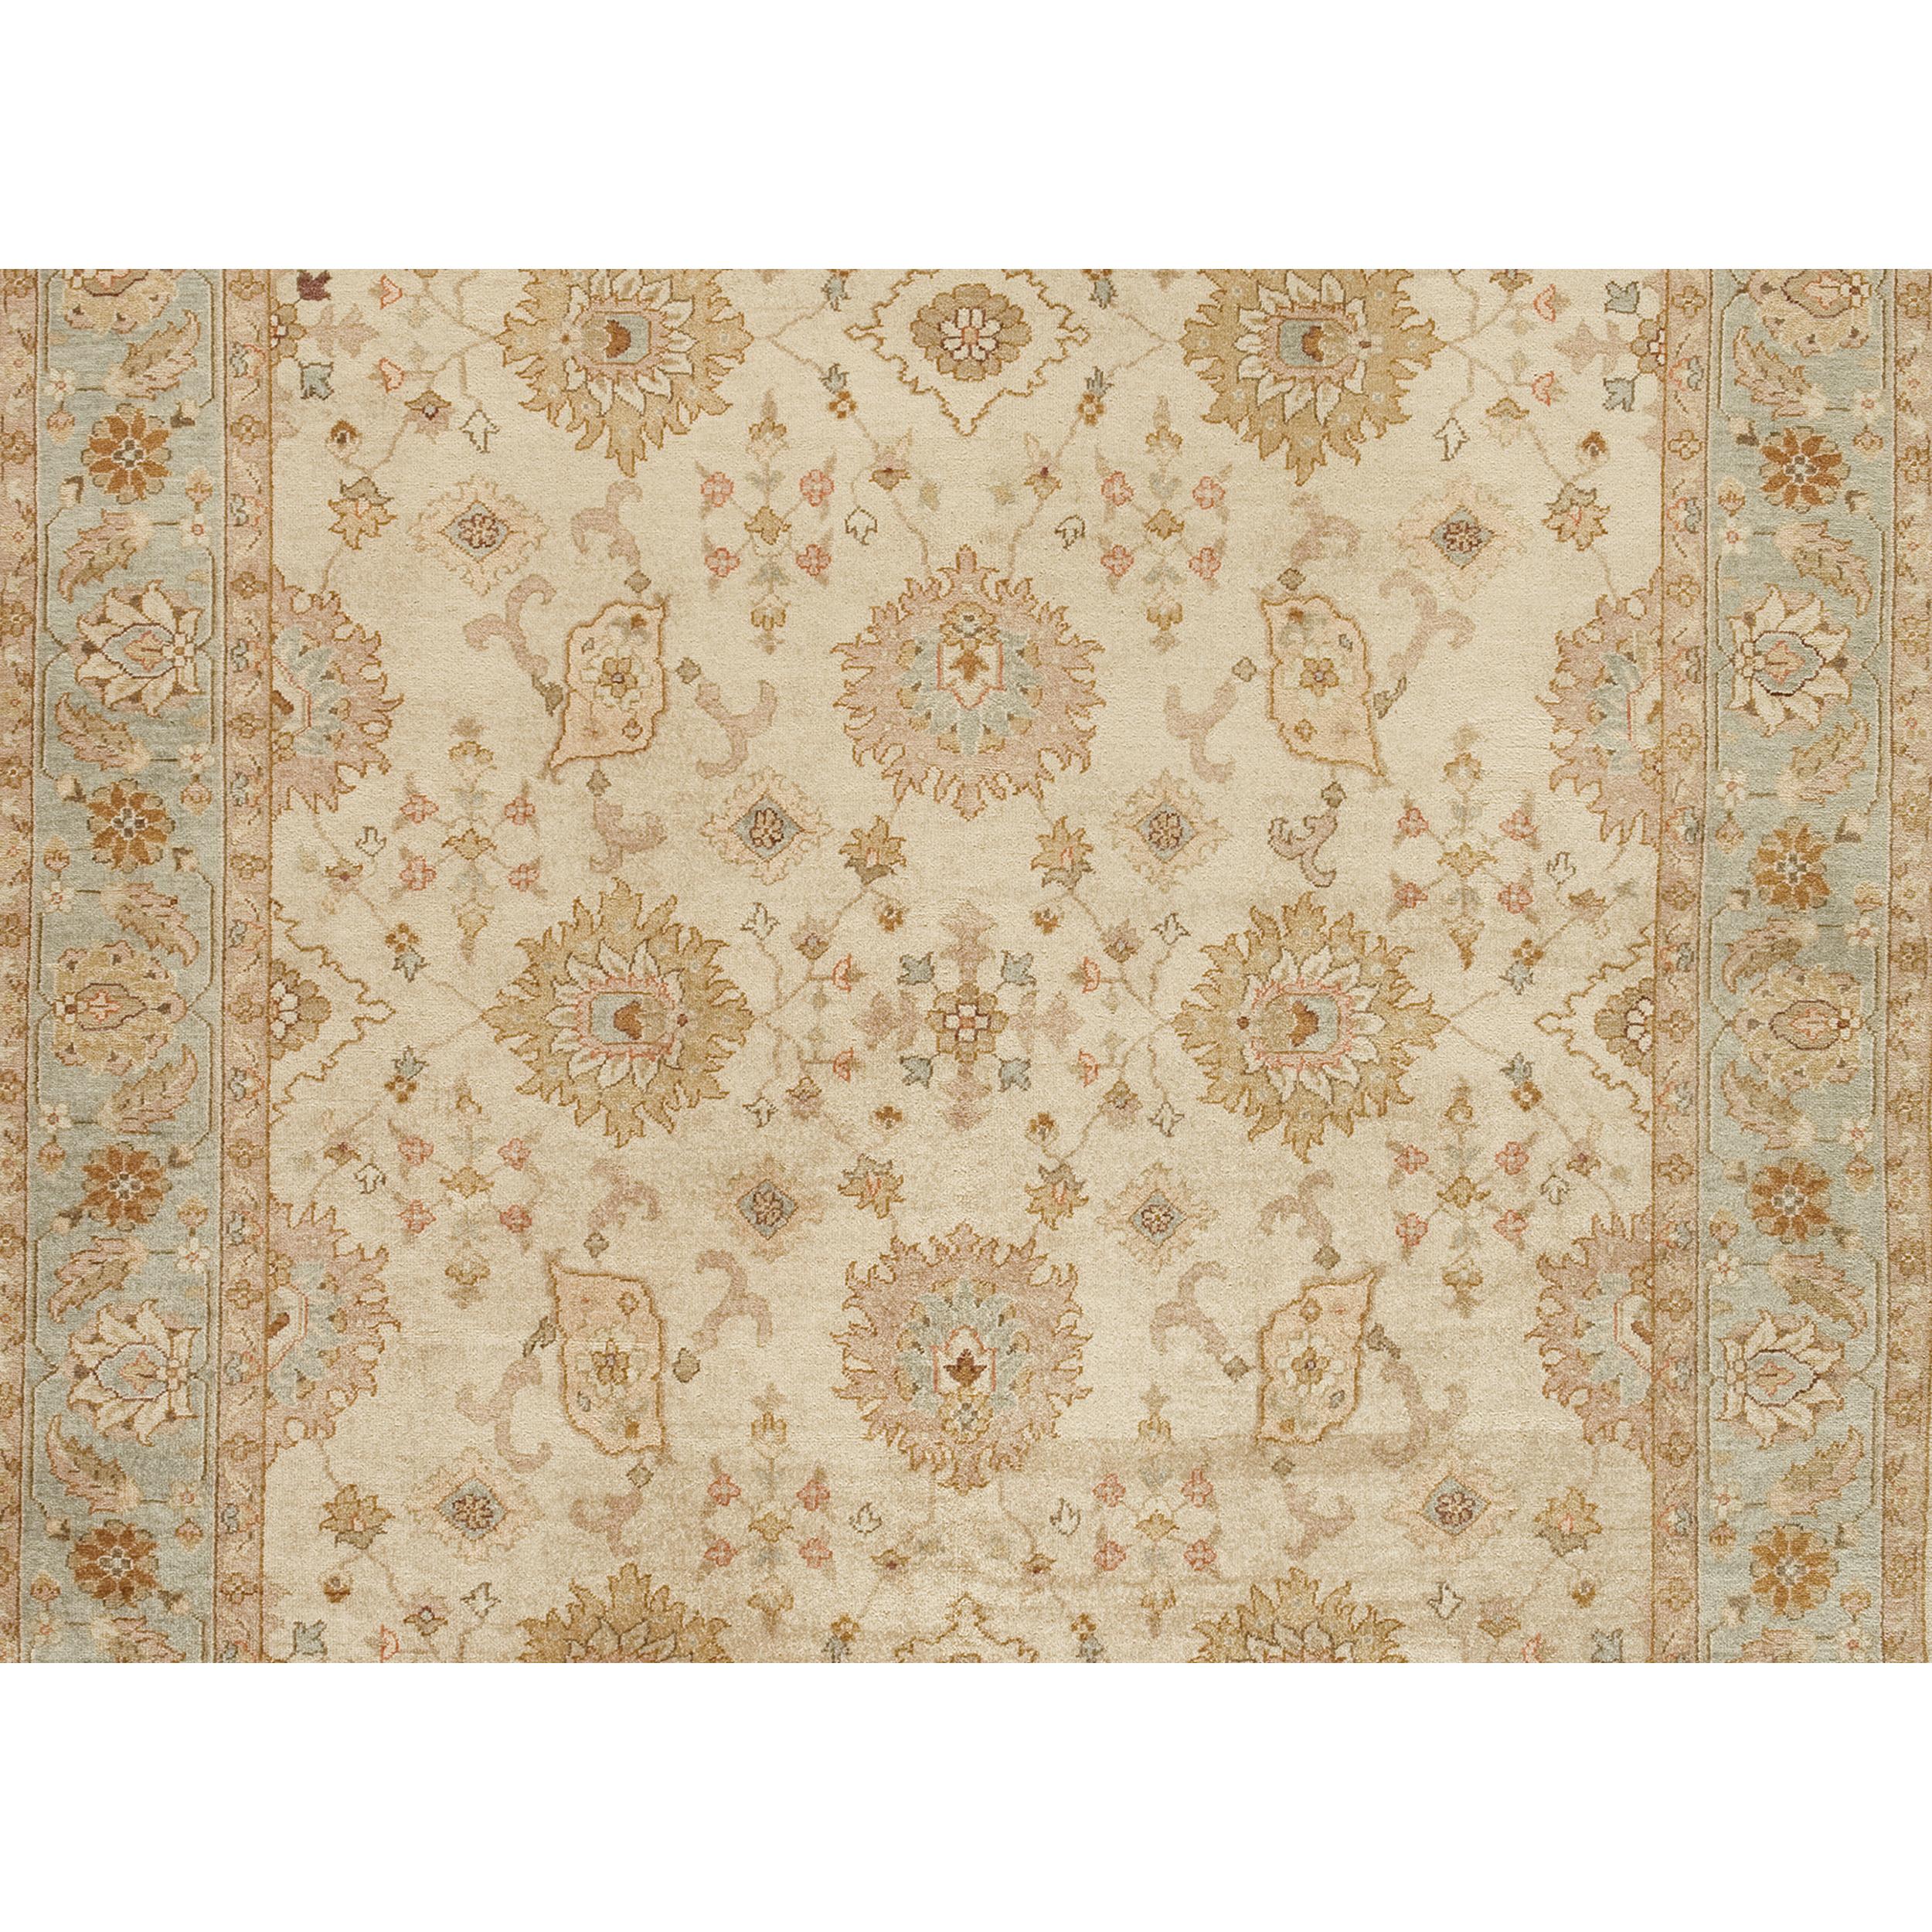 Chinese Luxury Traditional Hand-Knotted Ivory/Seafoam 10x14 Area Rug For Sale